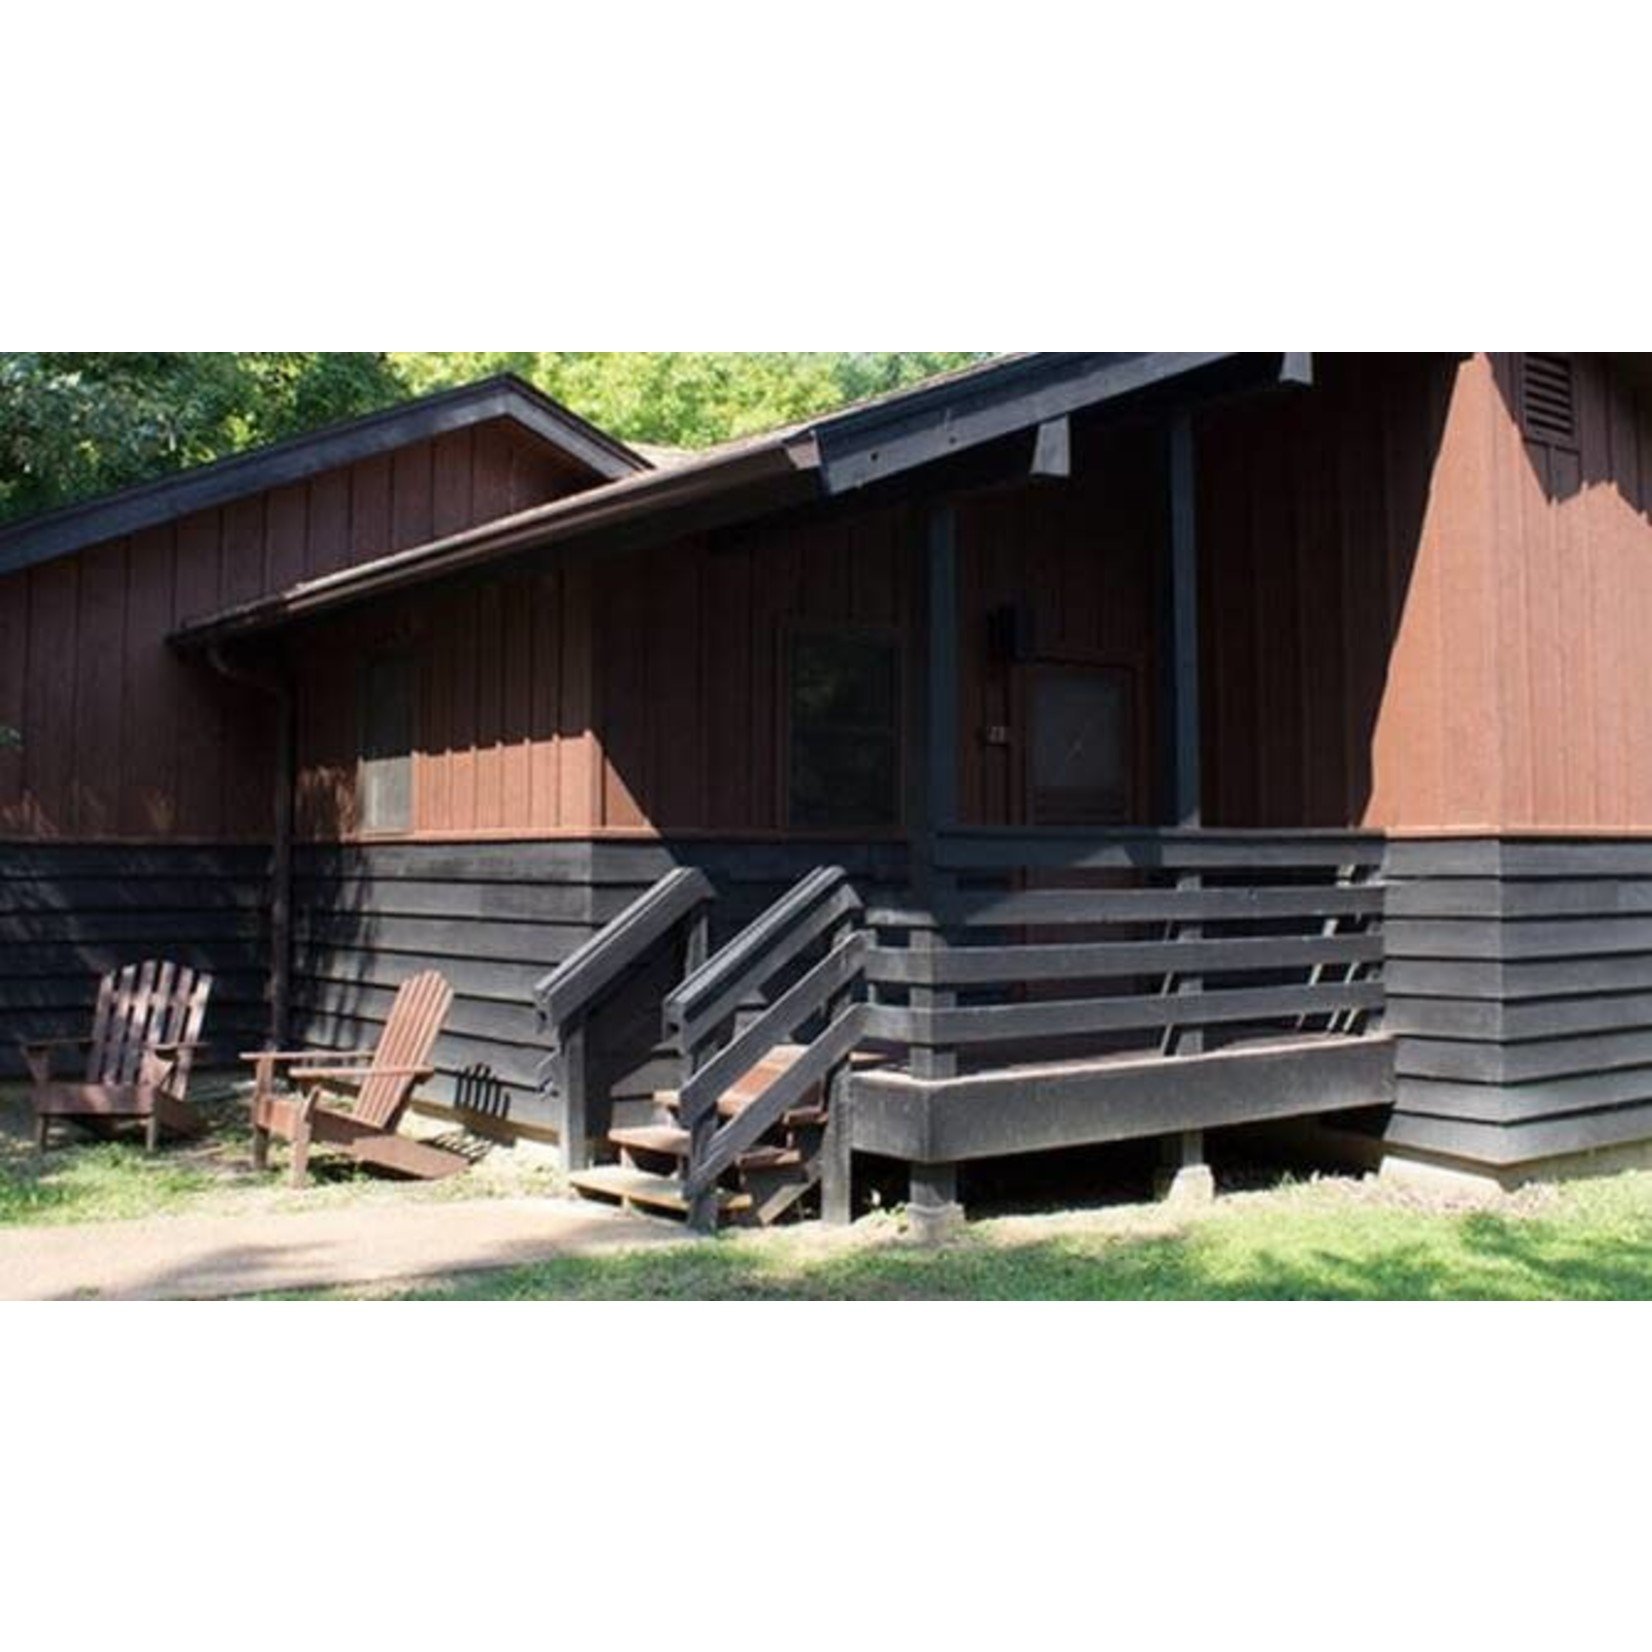 IL-Giant City State Park Lodge & Cabins-Makanda IL-Giant City State Park Lodge & Cabins-Makanda $235.00 (2) Night Stay in a Prairie Cabin